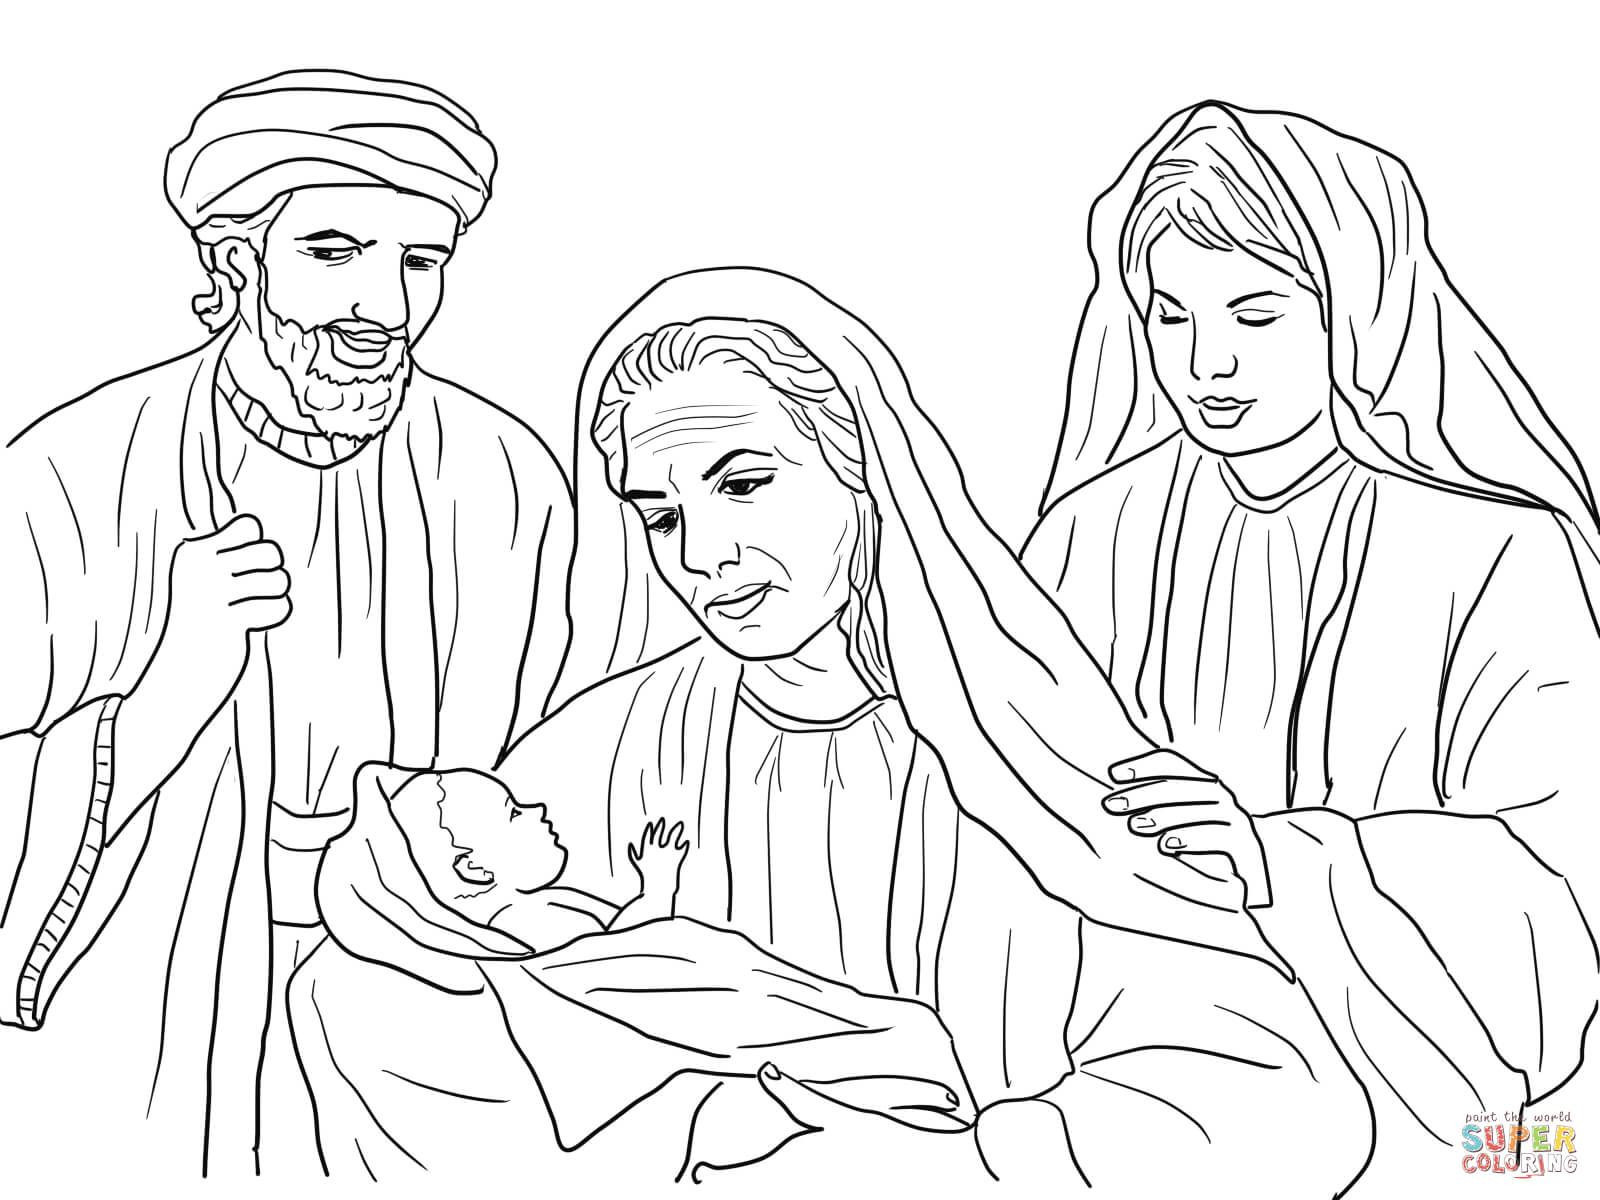 Coloring Pages For Children On The Story Of Ruth And Naomi
 Boaz Naomi Ruth and Baby Obed coloring page